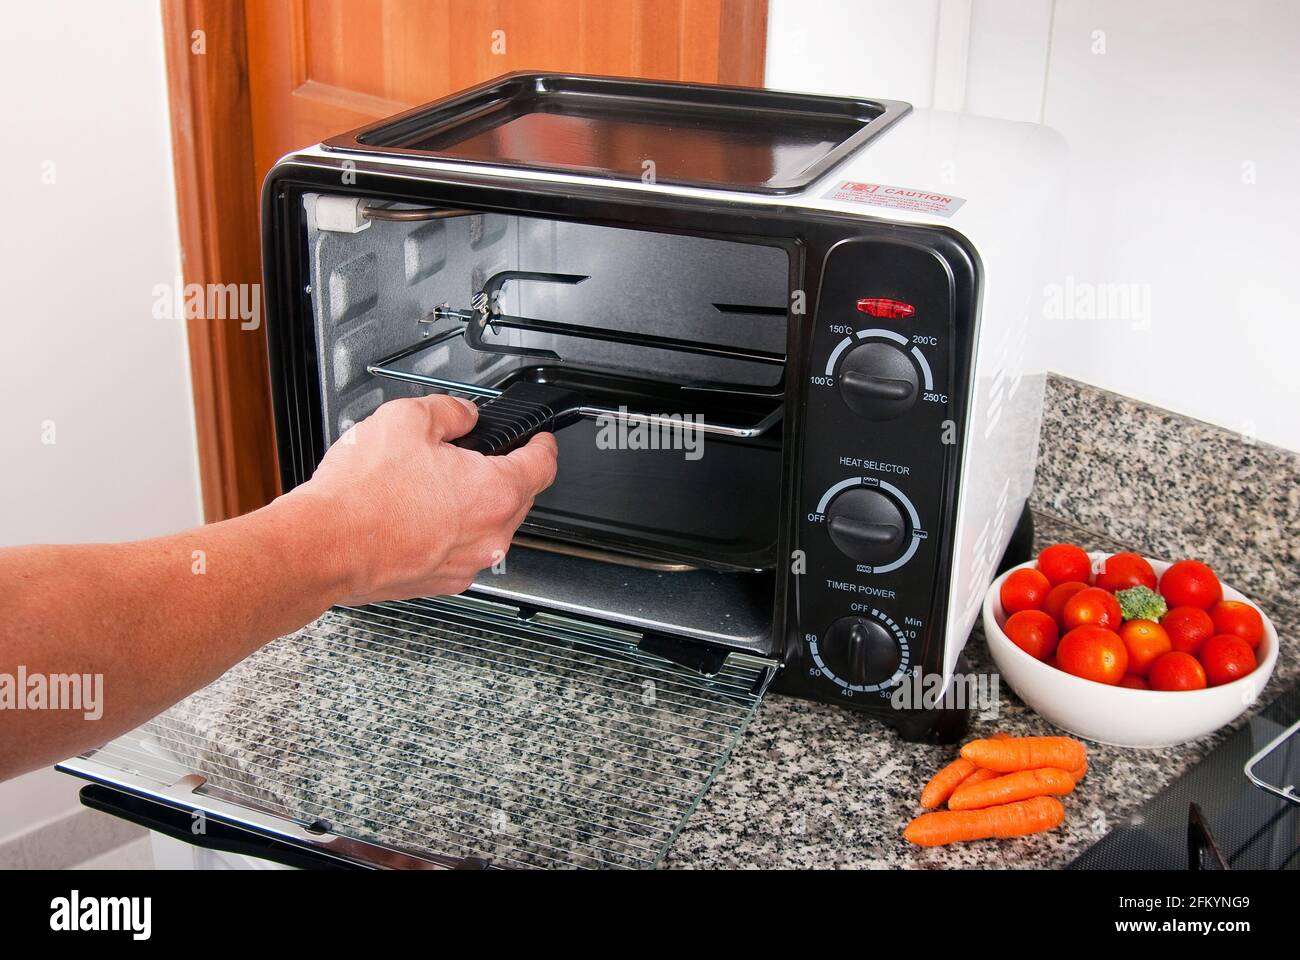 Household appliance; toaster oven, photo in kitchen environment Stock Photo  - Alamy